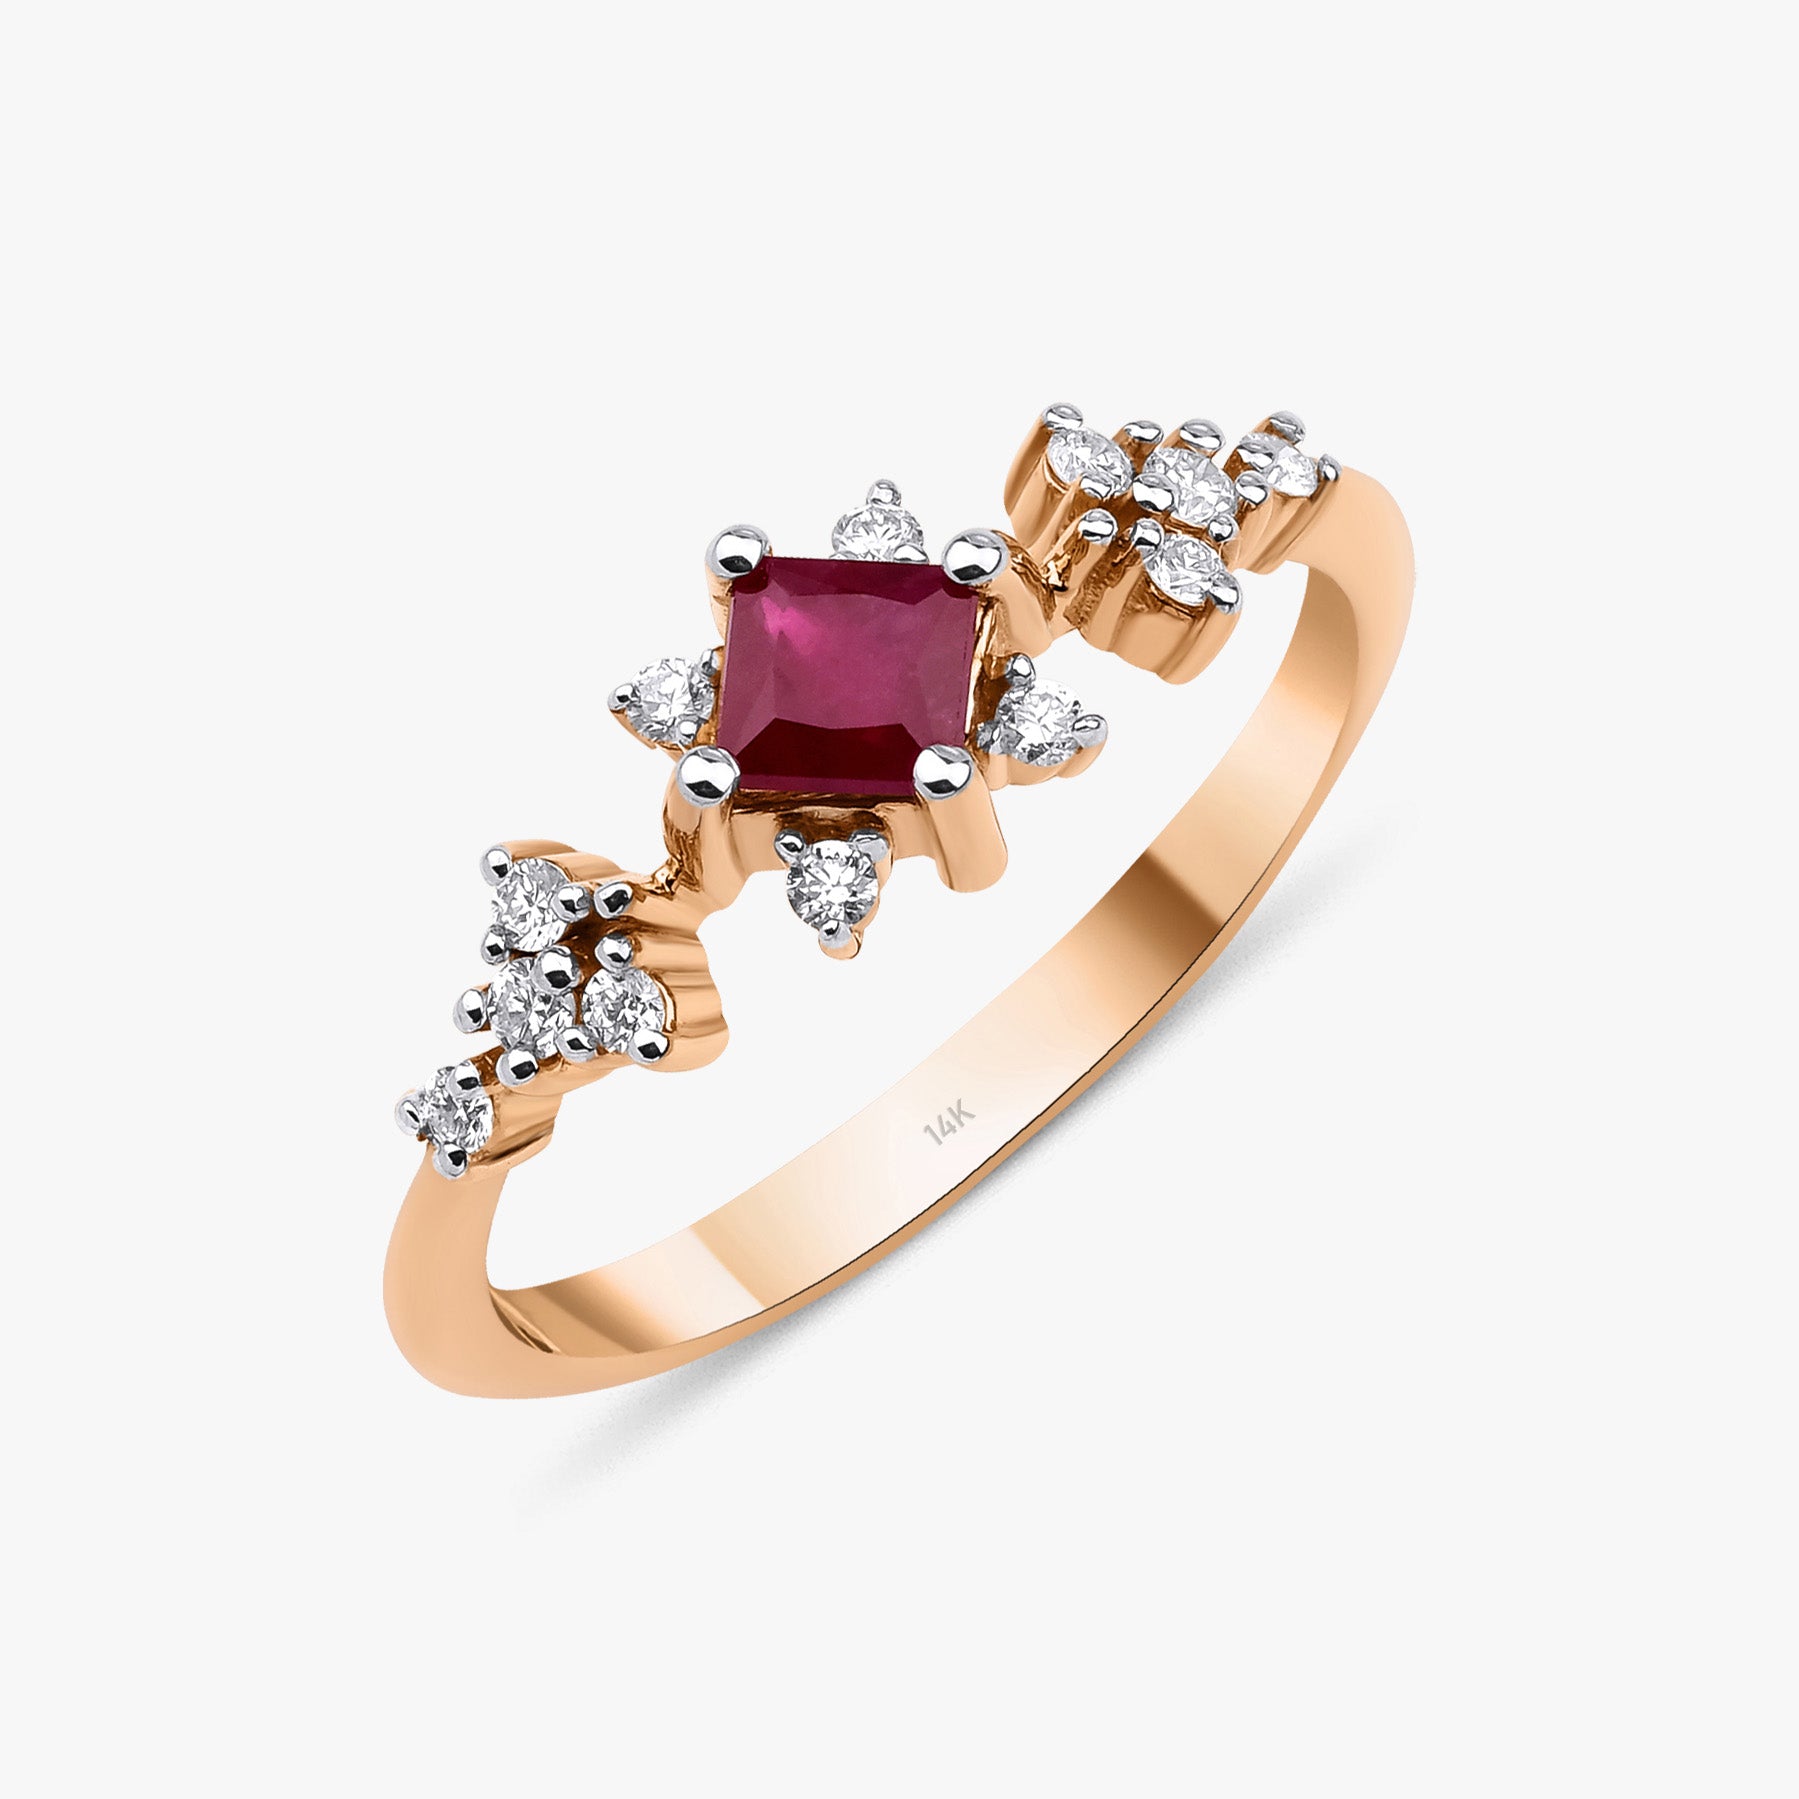 Princess Cut Ruby and Diamond Ring in 14K Gold